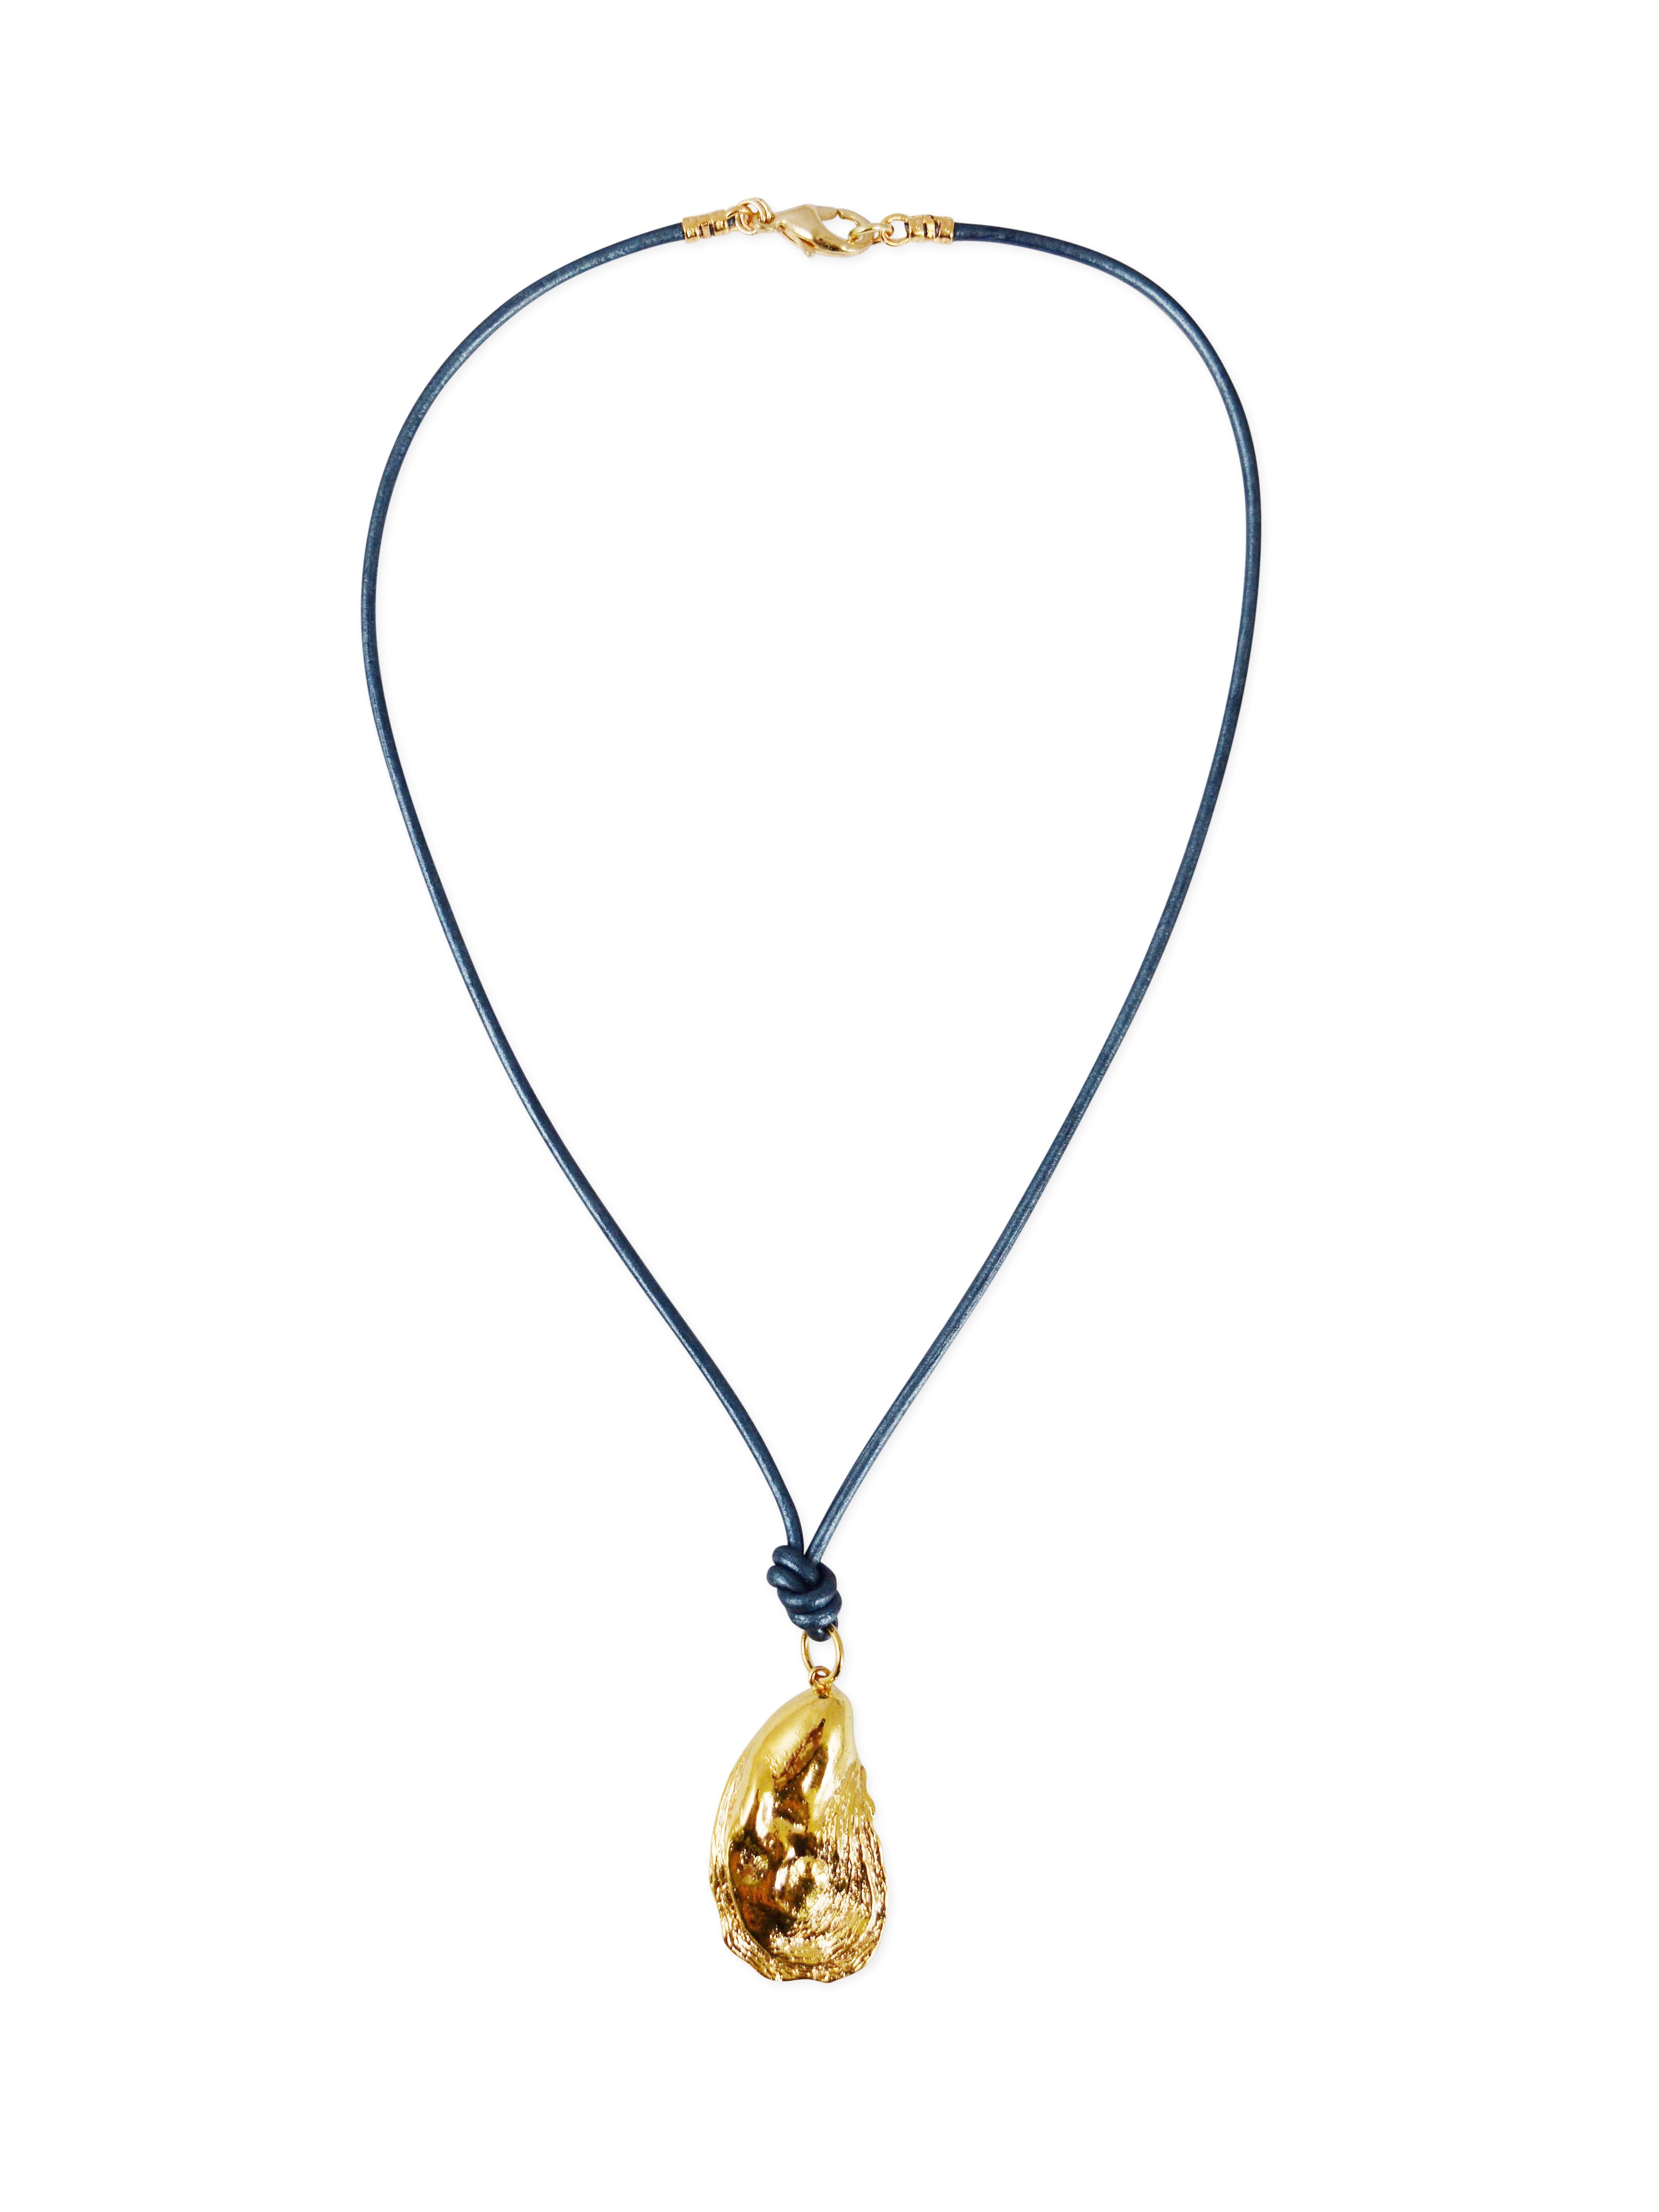 Santee Necklace in Gold